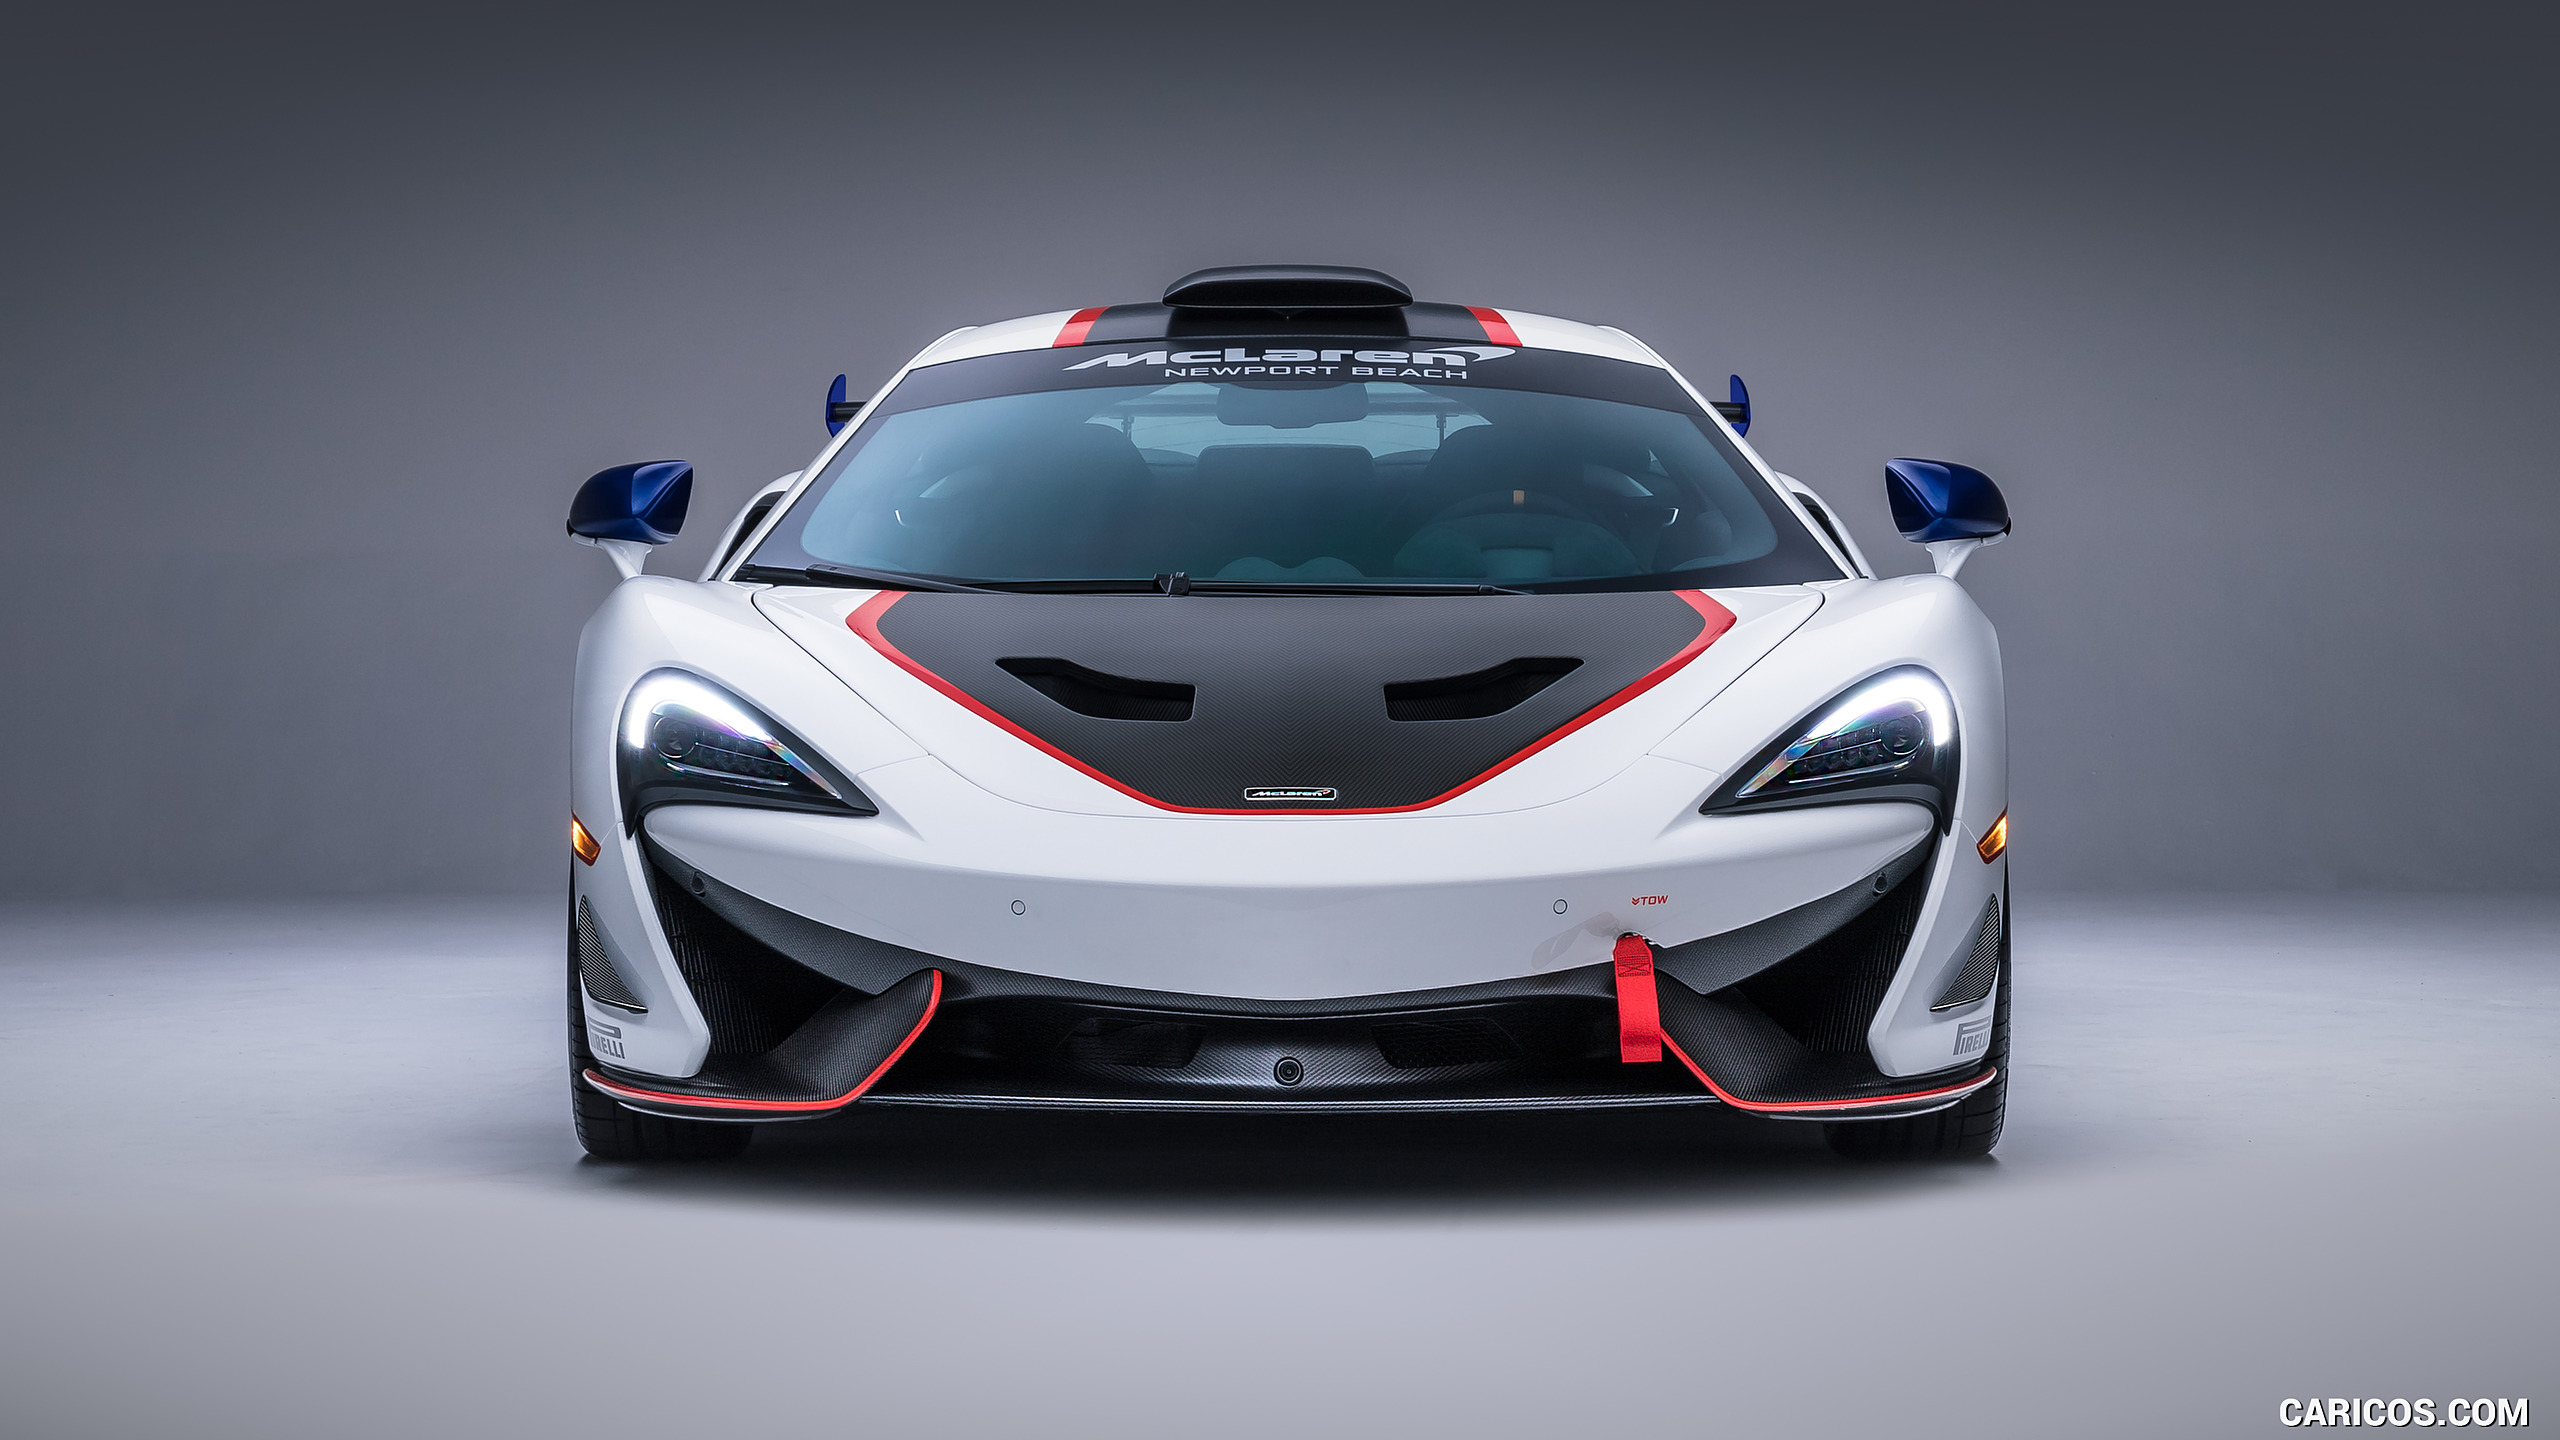 2018 McLaren 570S GT4 MSO X No. 8 White Red And Blue Accents - Front, #5 of 22